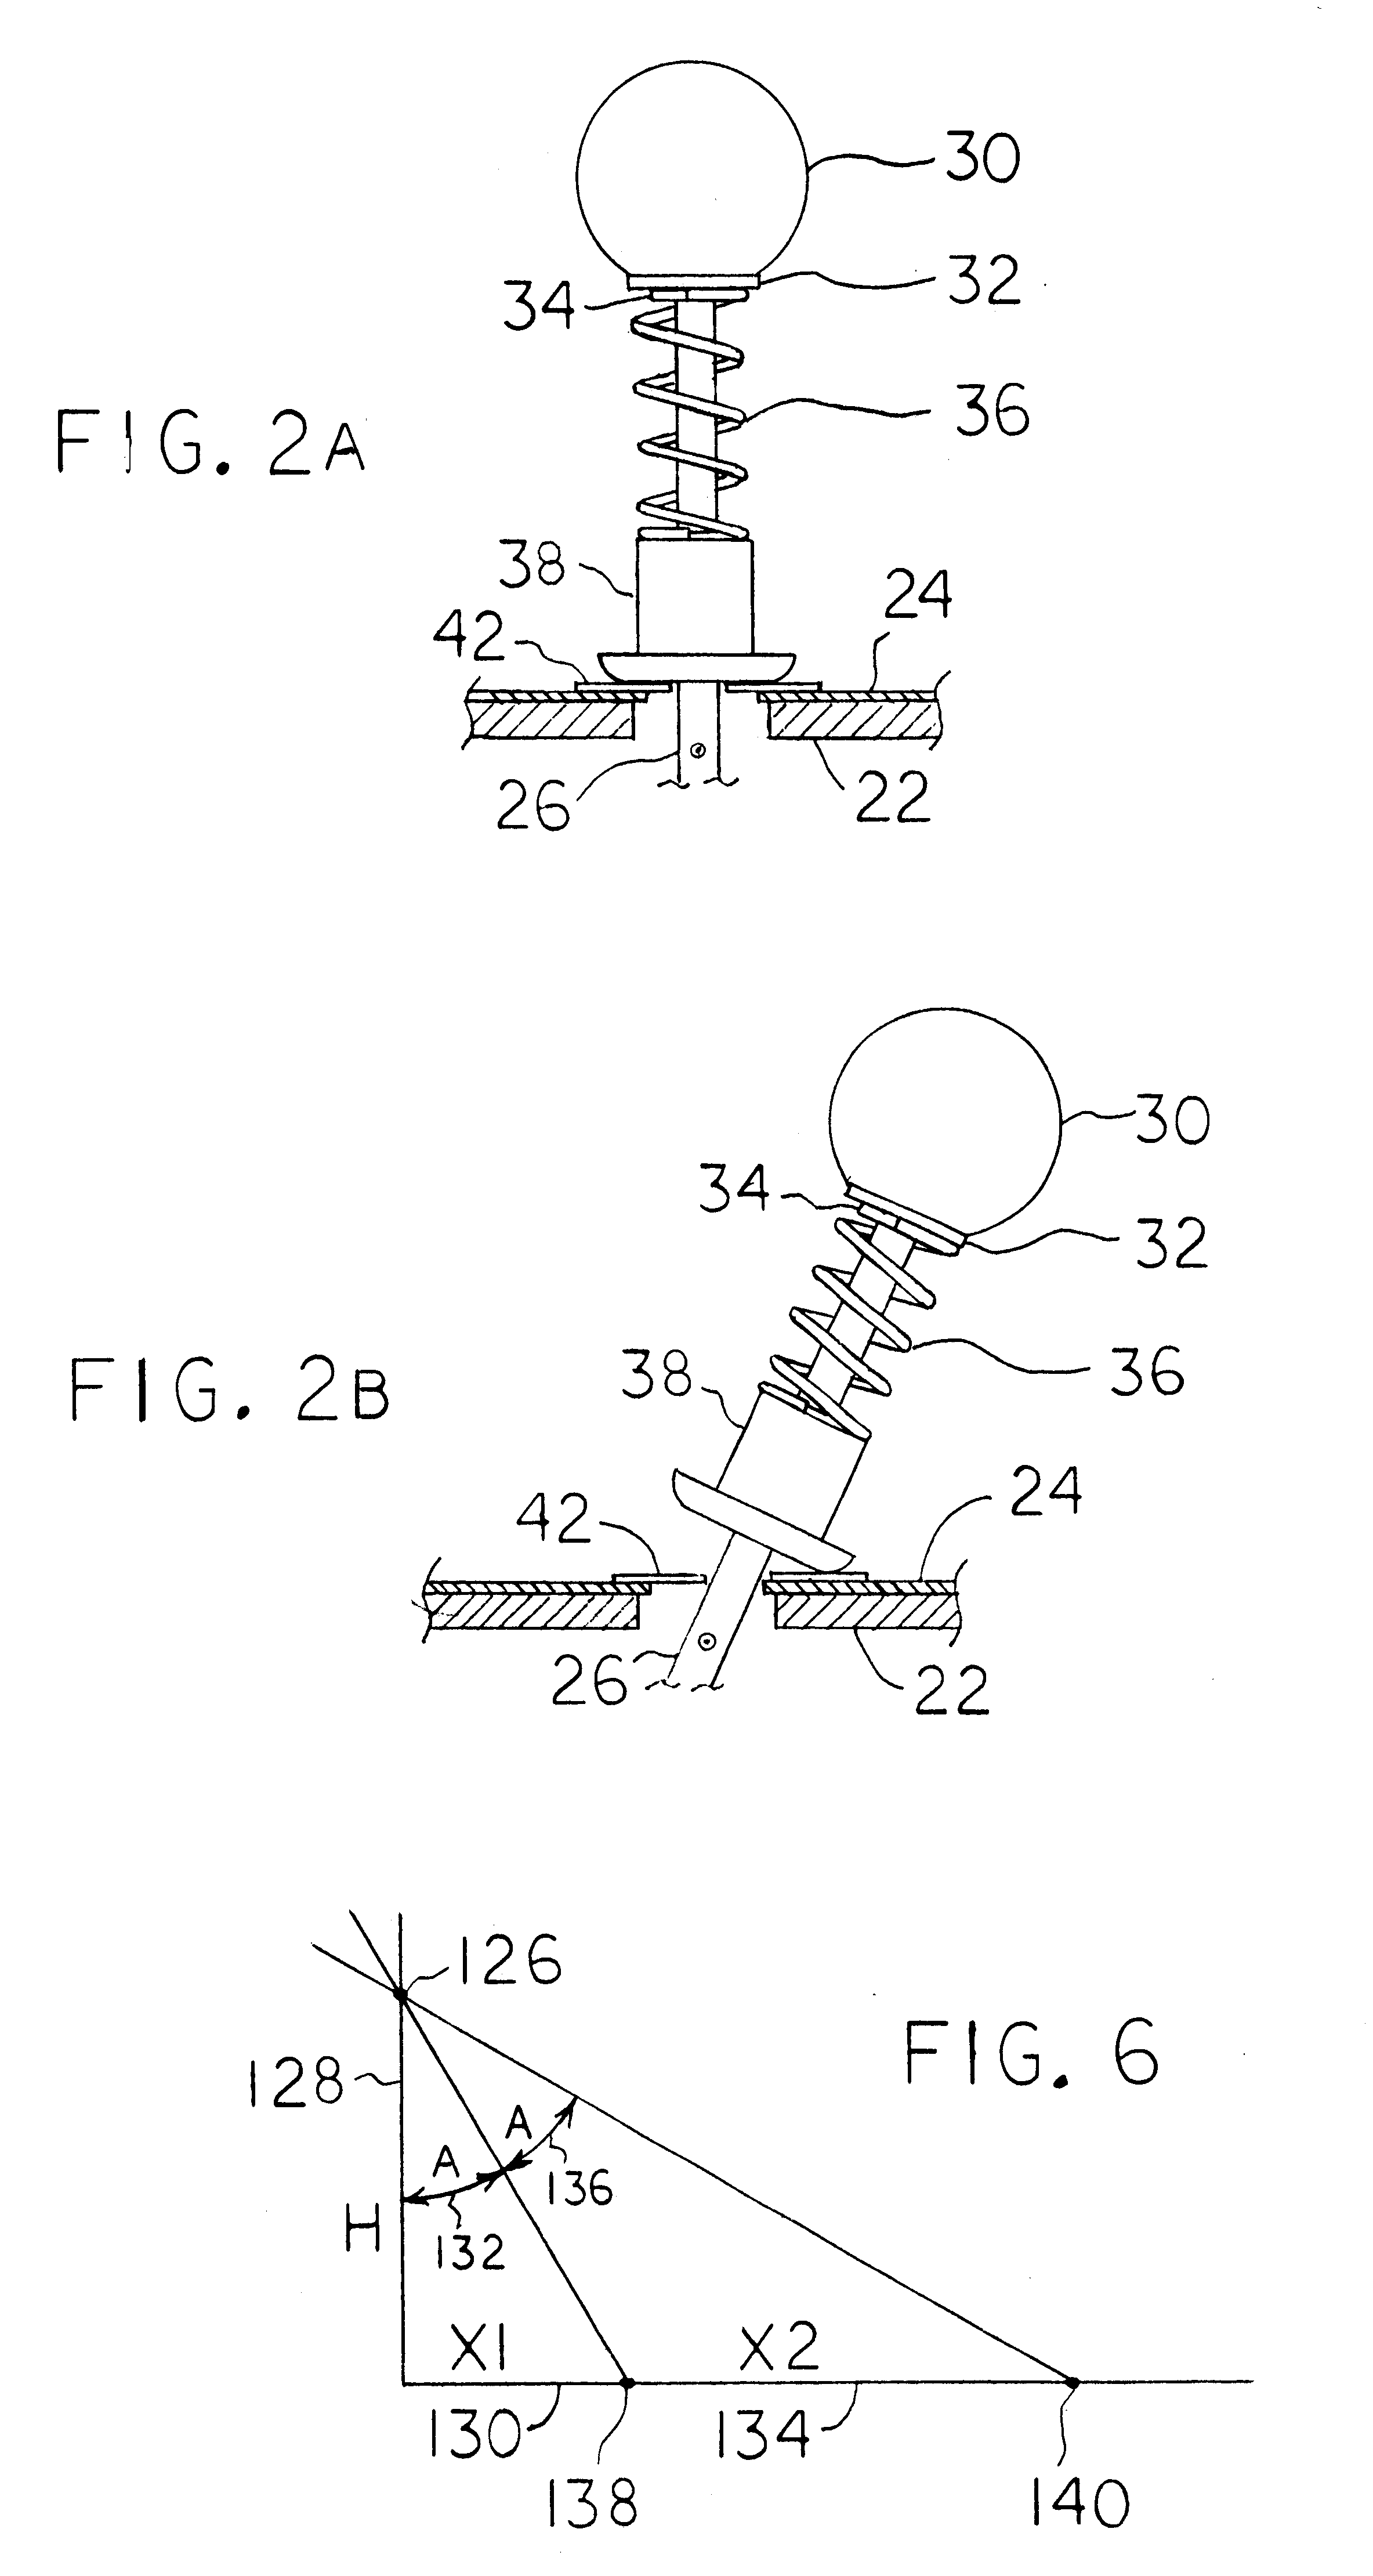 Digital optical joystick with mechanically magnified resolution